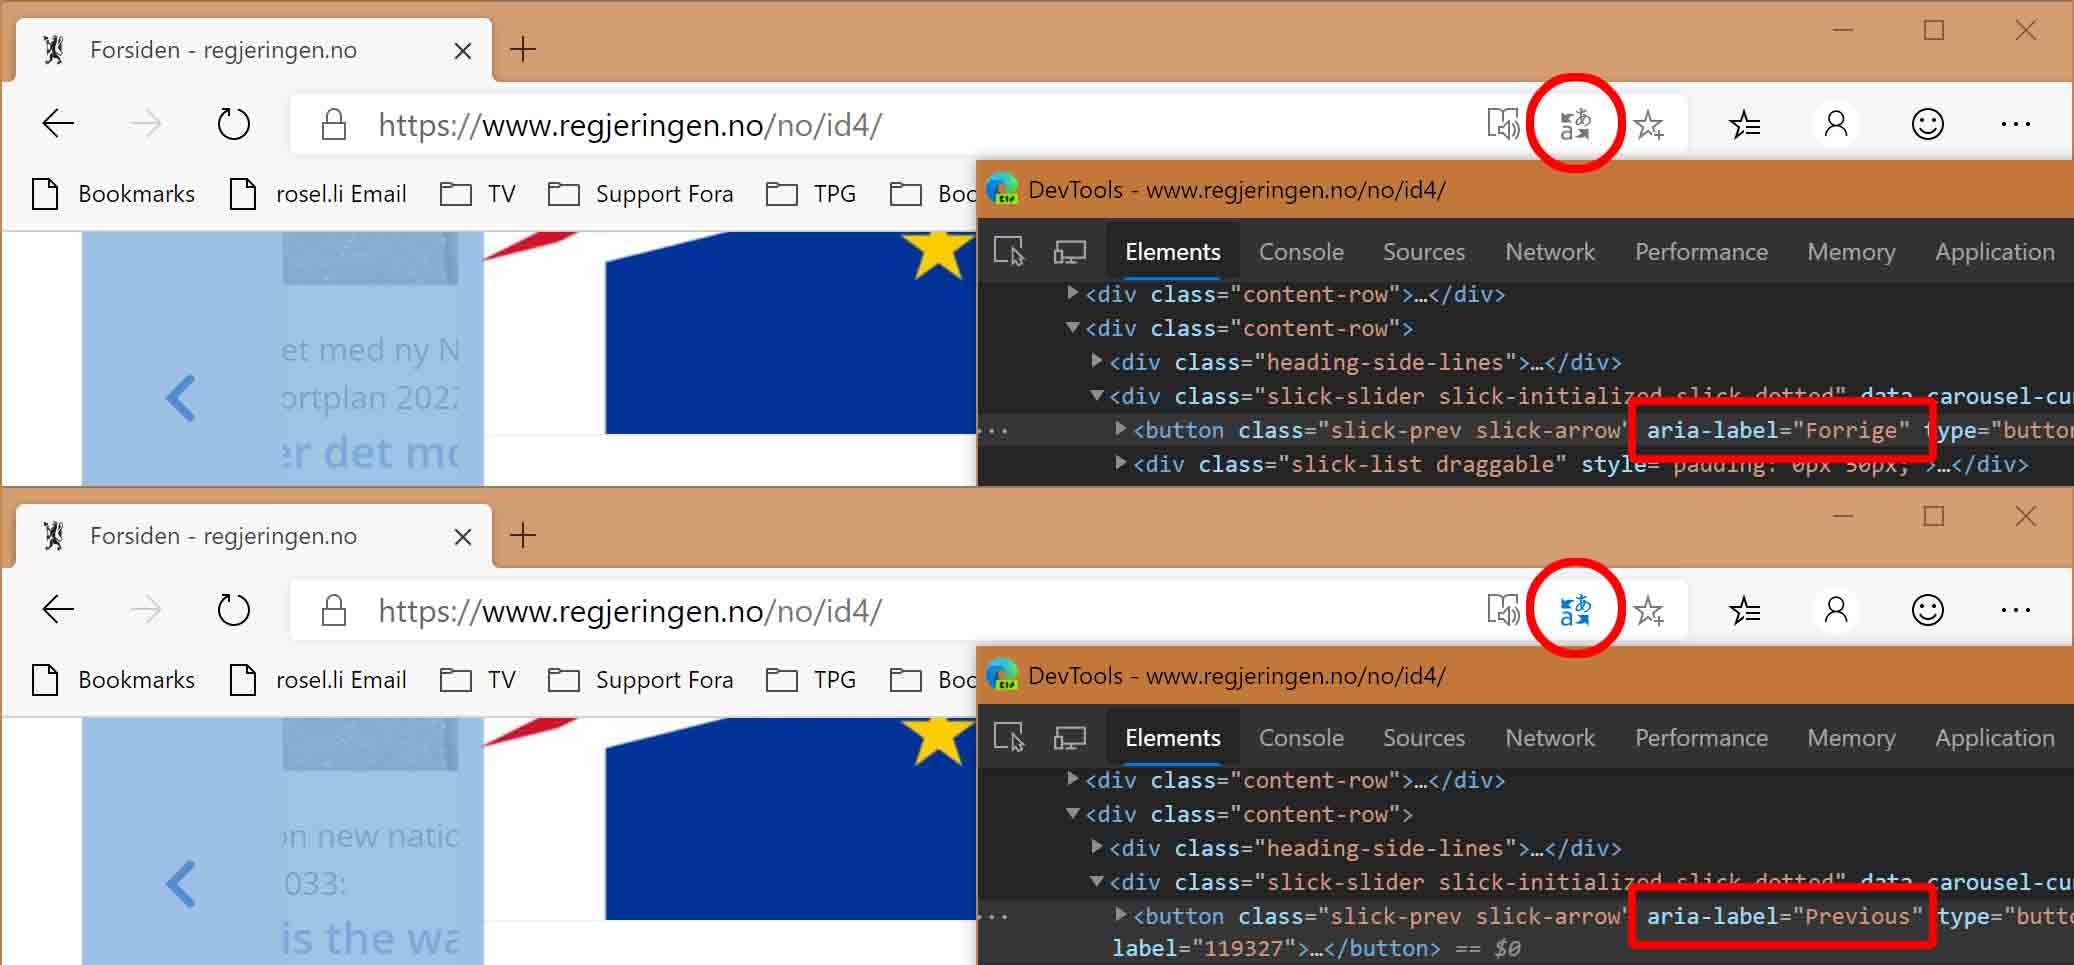 Screen shots comparing a pre- and post-translated page in Edge.